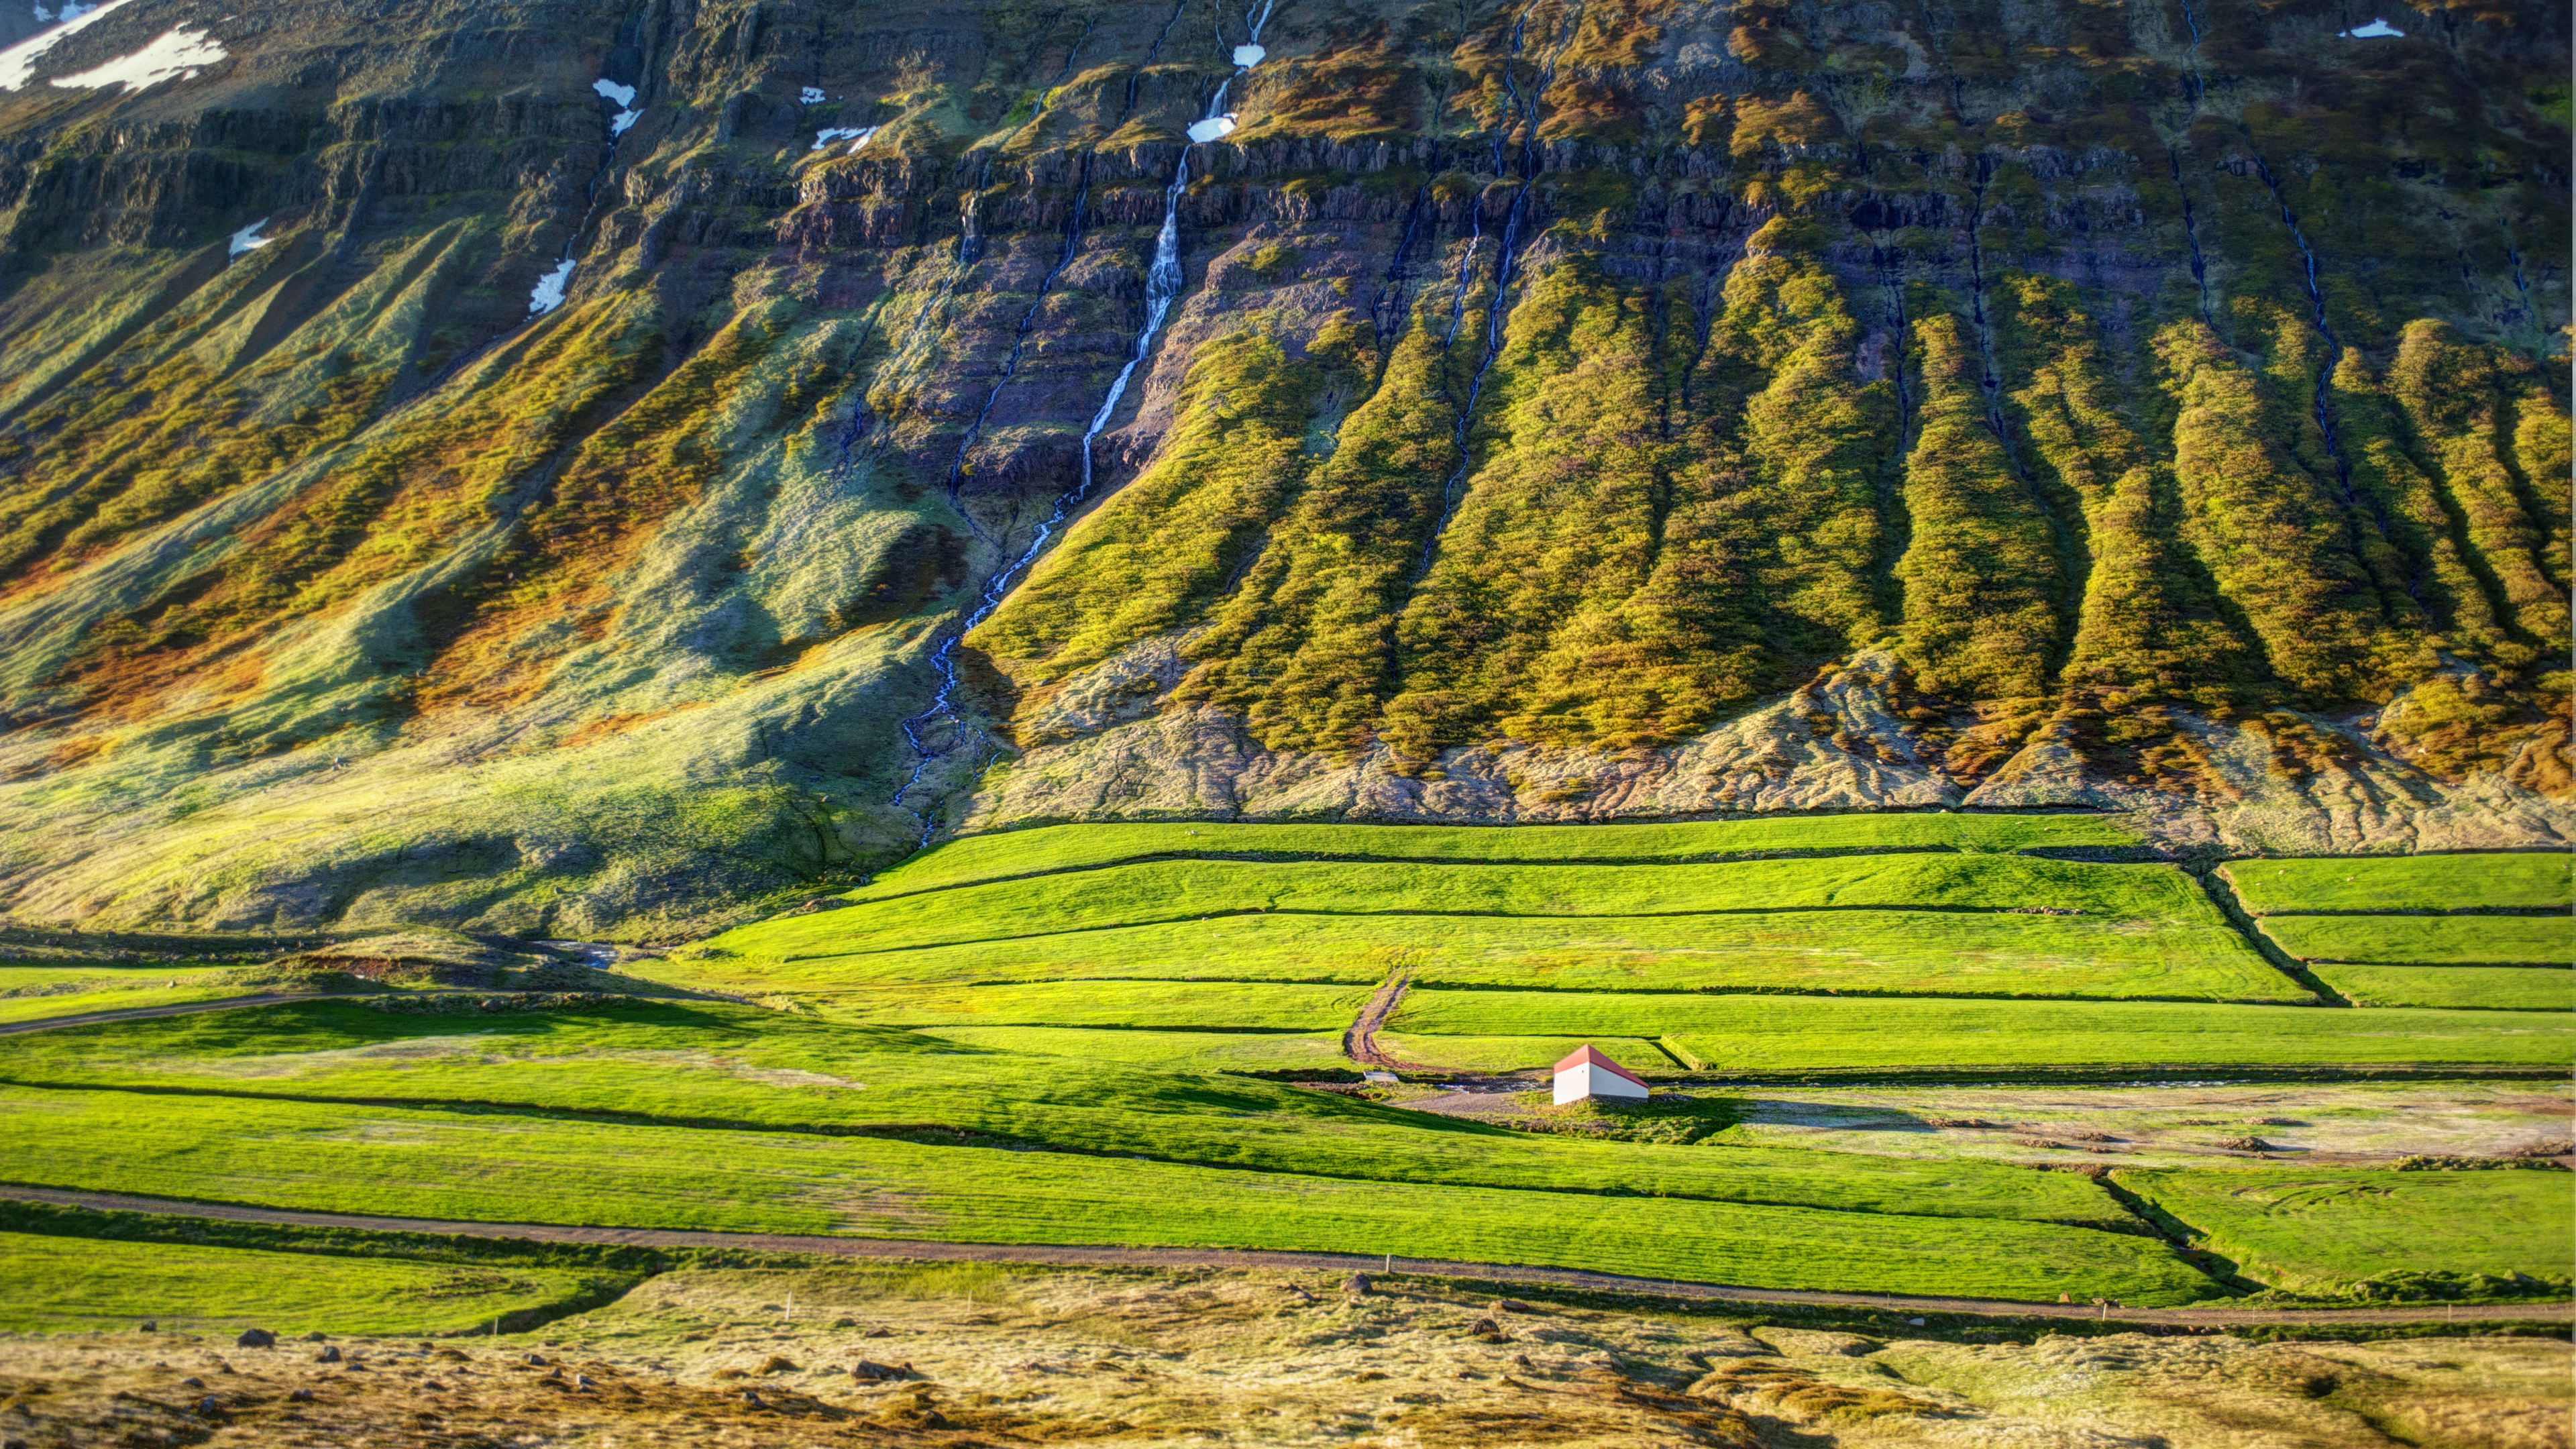 General 3840x2160 landscape Iceland Trey Ratcliff photography nature mountains field road farm